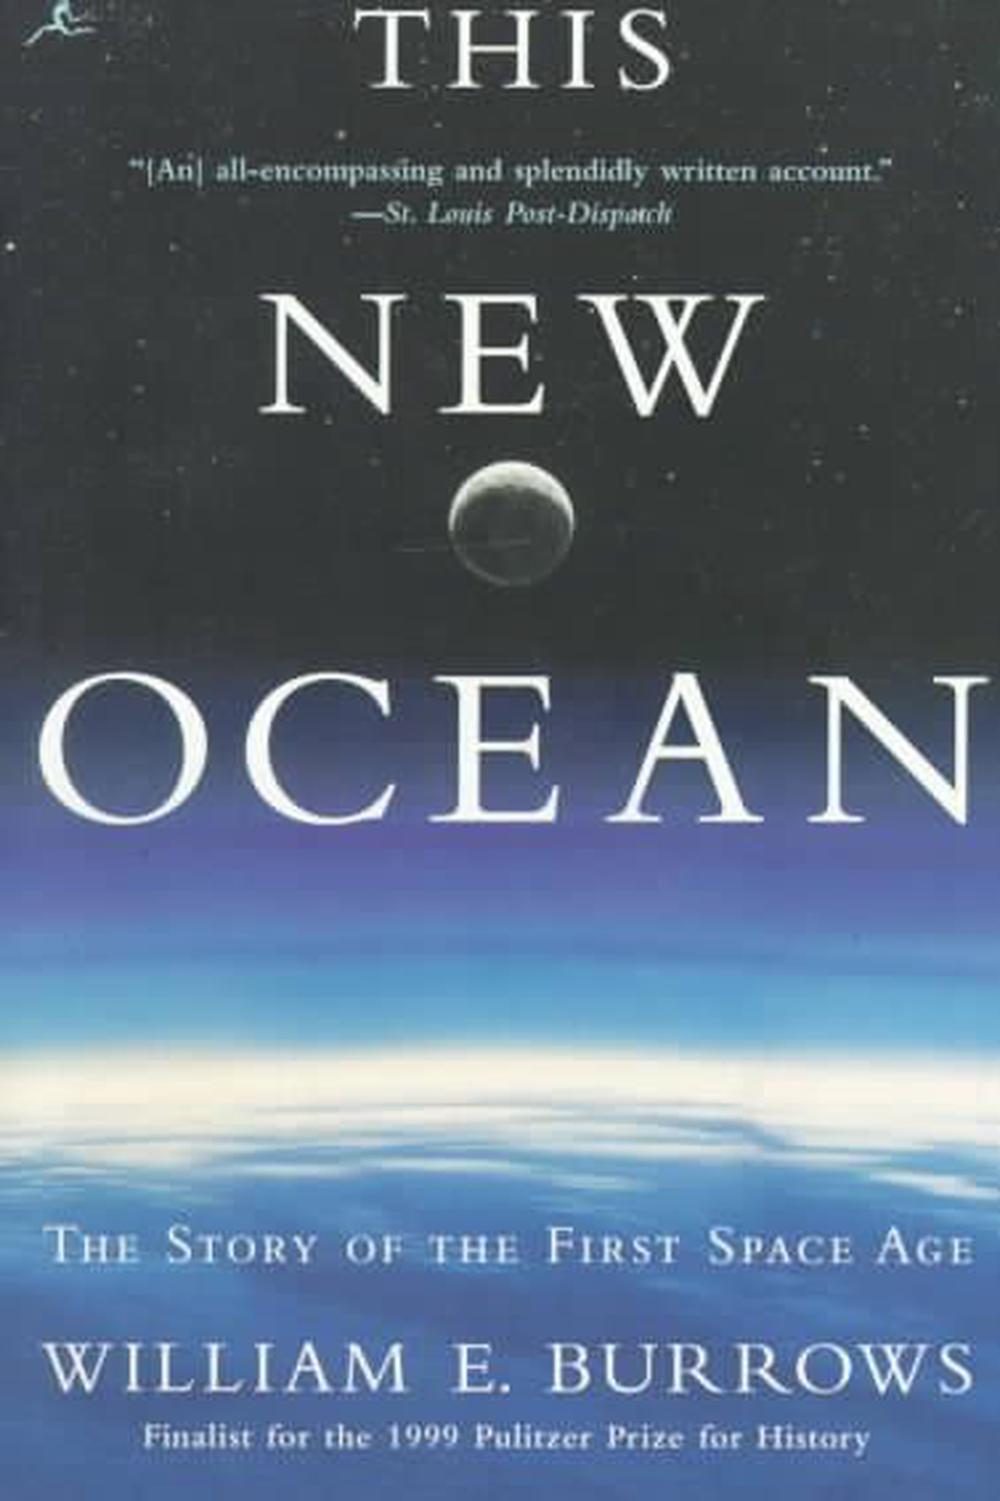 This New Ocean: The Story of the First Space Age by William E. Burrows (English) 9780375754852 ...